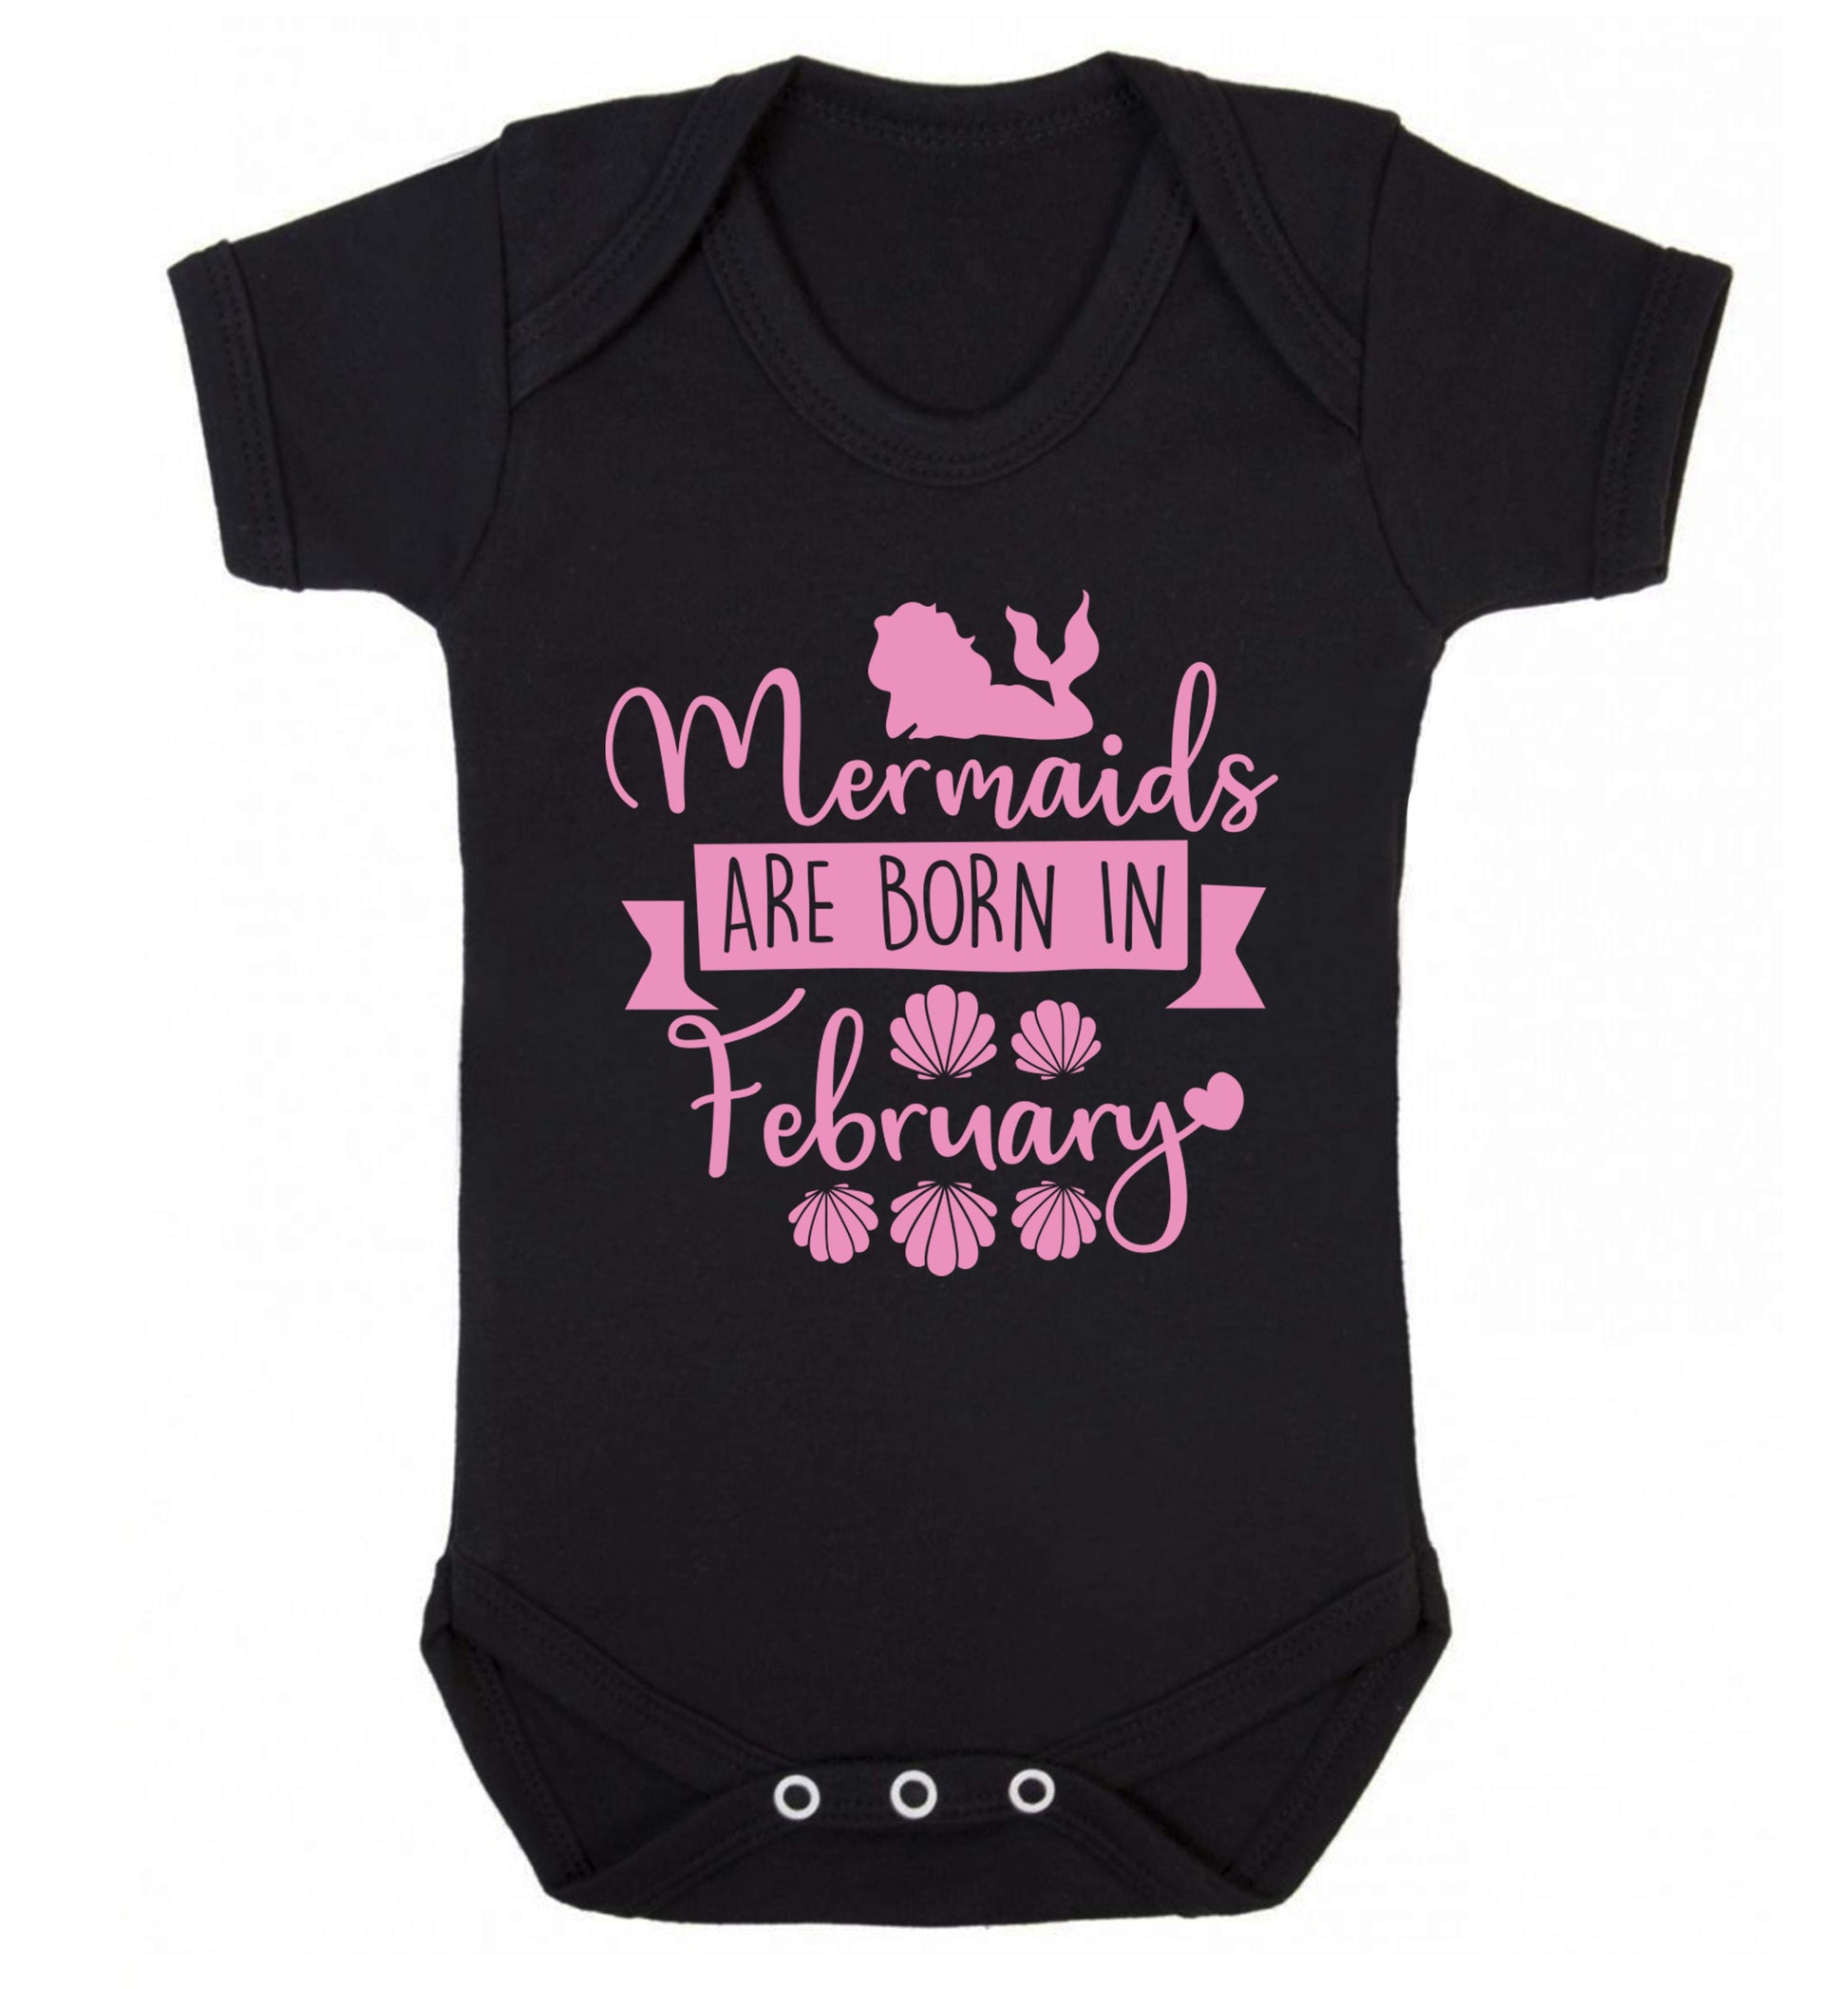 Mermaids are born in February Baby Vest black 18-24 months